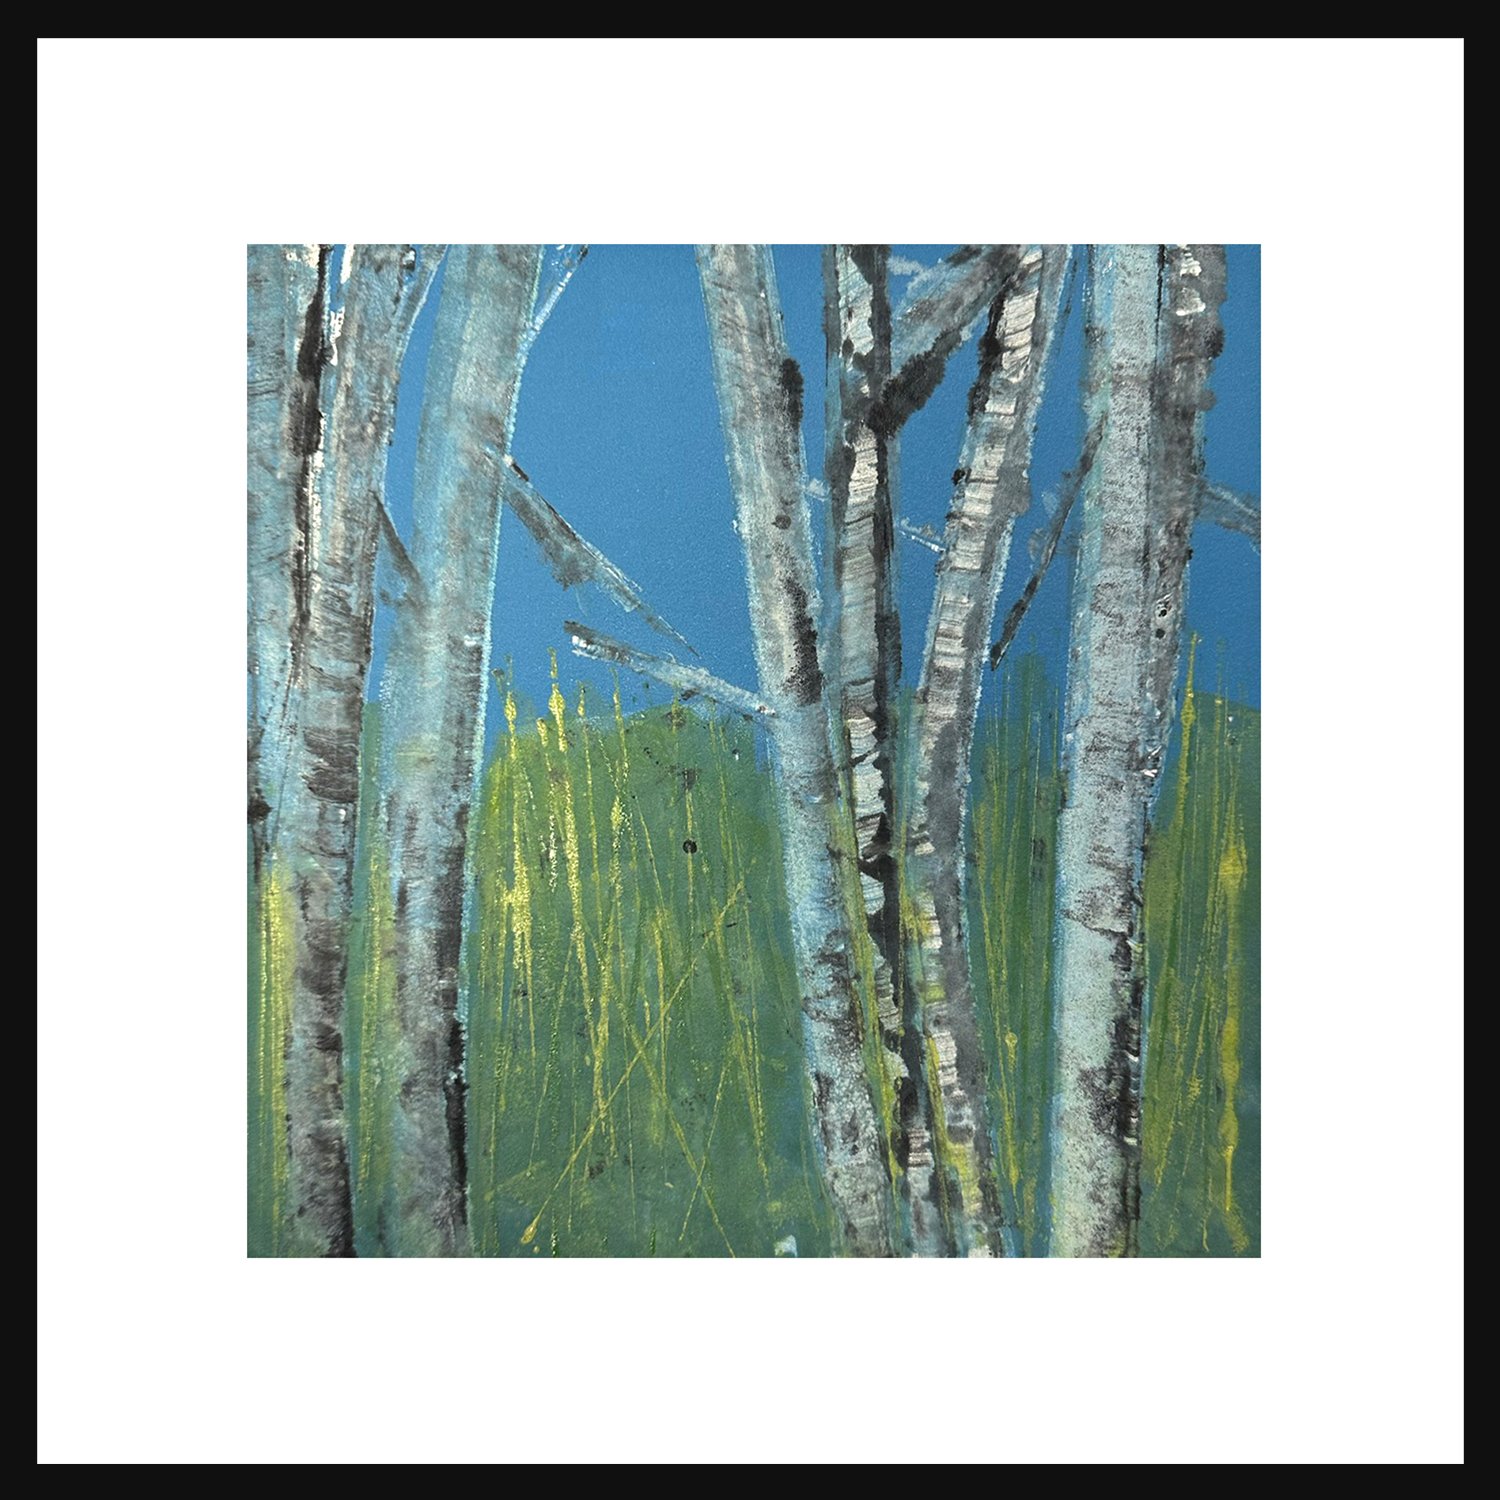    Blue Sky Days   “The clearest way into the Universe is through a forest wilderness.”― John Muir  Mixed media monotype, custom mat and gray metal frame, 16.25 x 16.25,” 1/1   $397 - SOLD  